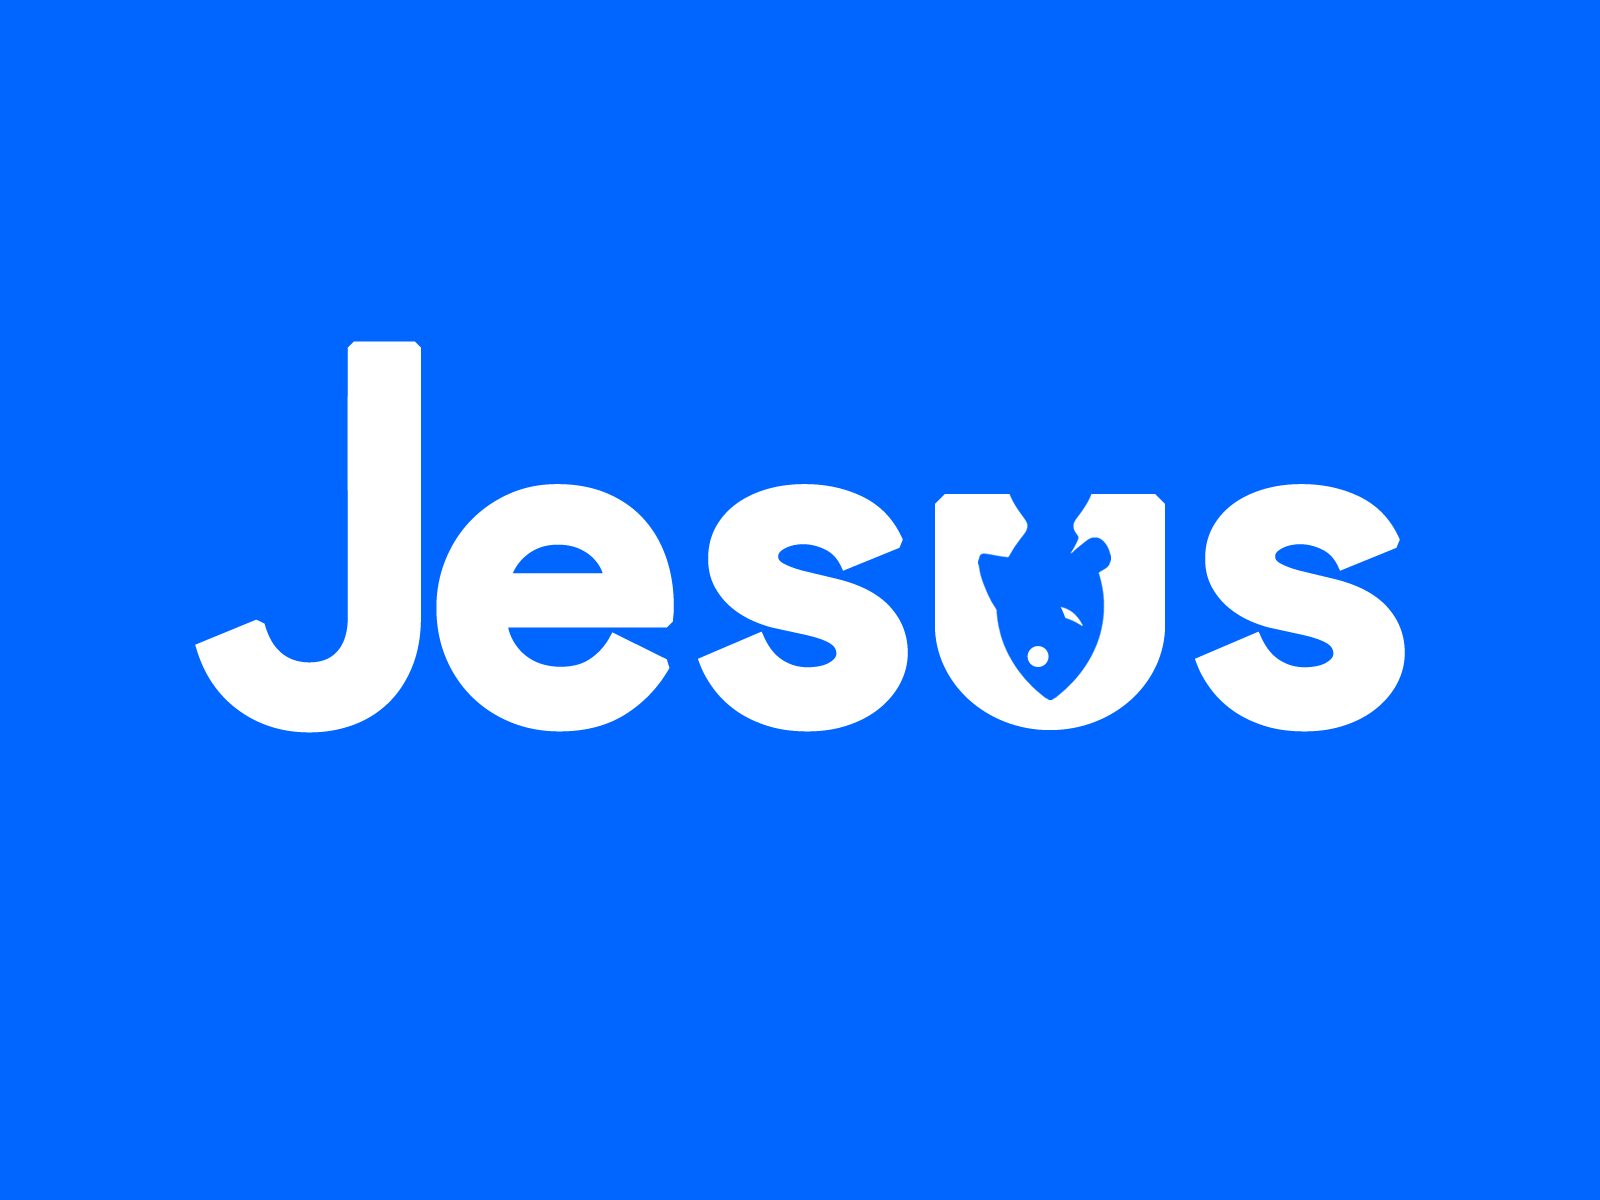 Jesus 👉 Fish 🐟 Typography by Proverbs 10:11 ⛲💪🏿💪🏾💪🏽💪🏻💪💪🏼 on Dribbble